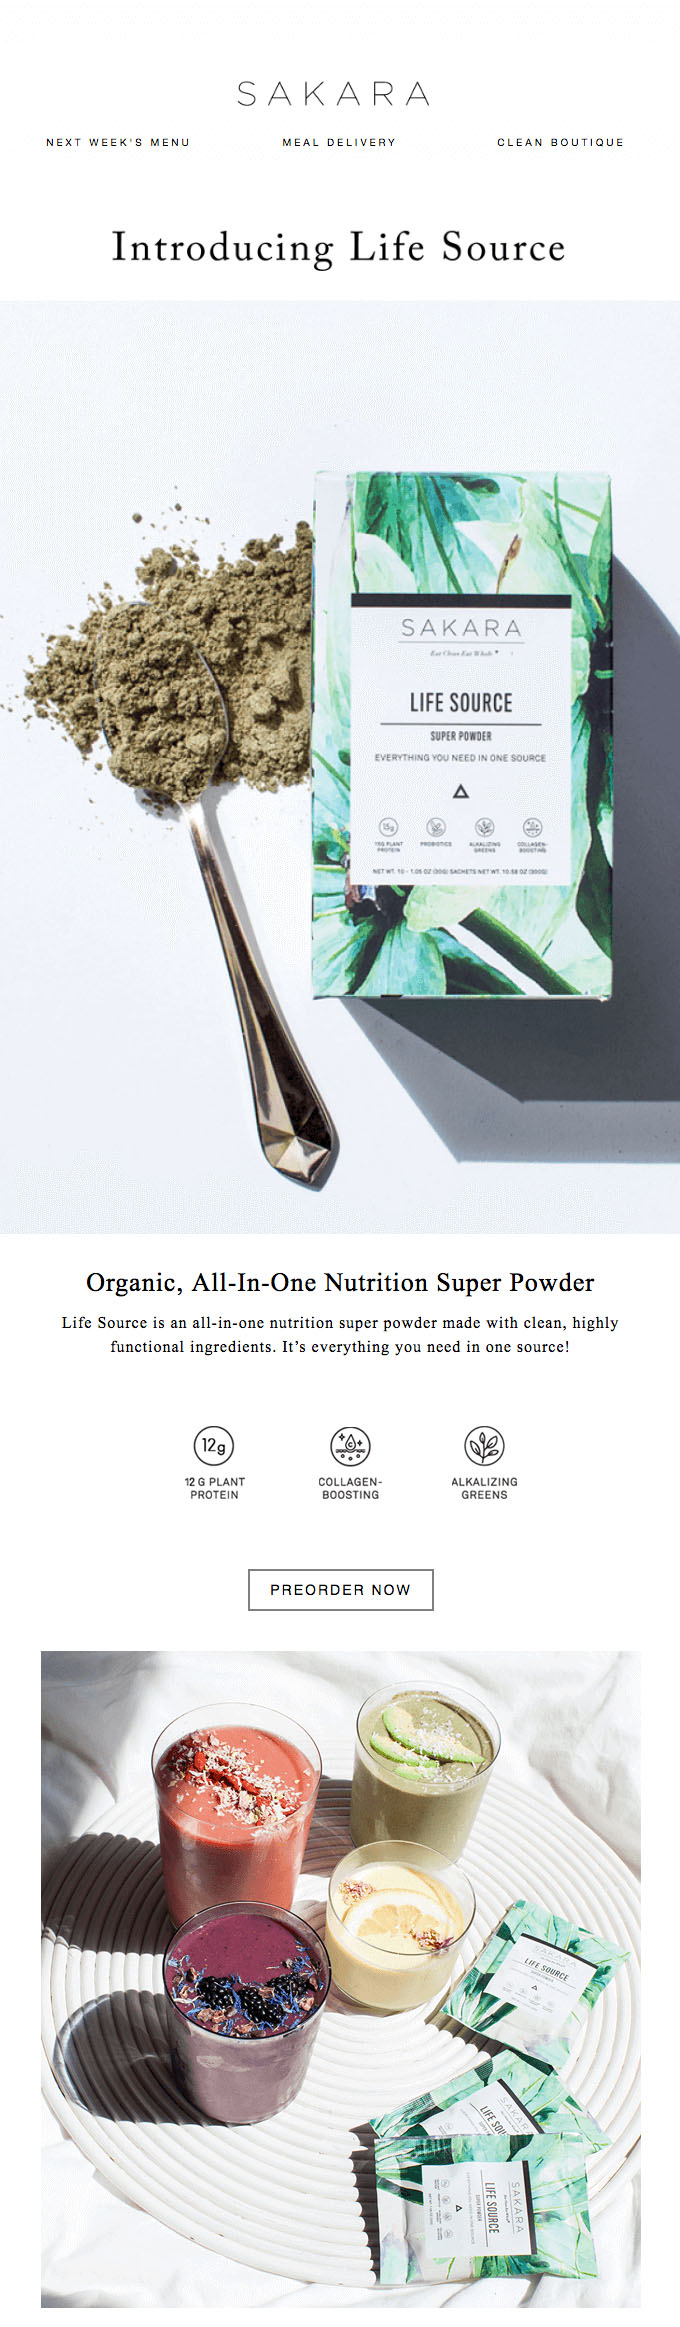 Subscriber Emails - New Product Announcement Email Example - Sakara